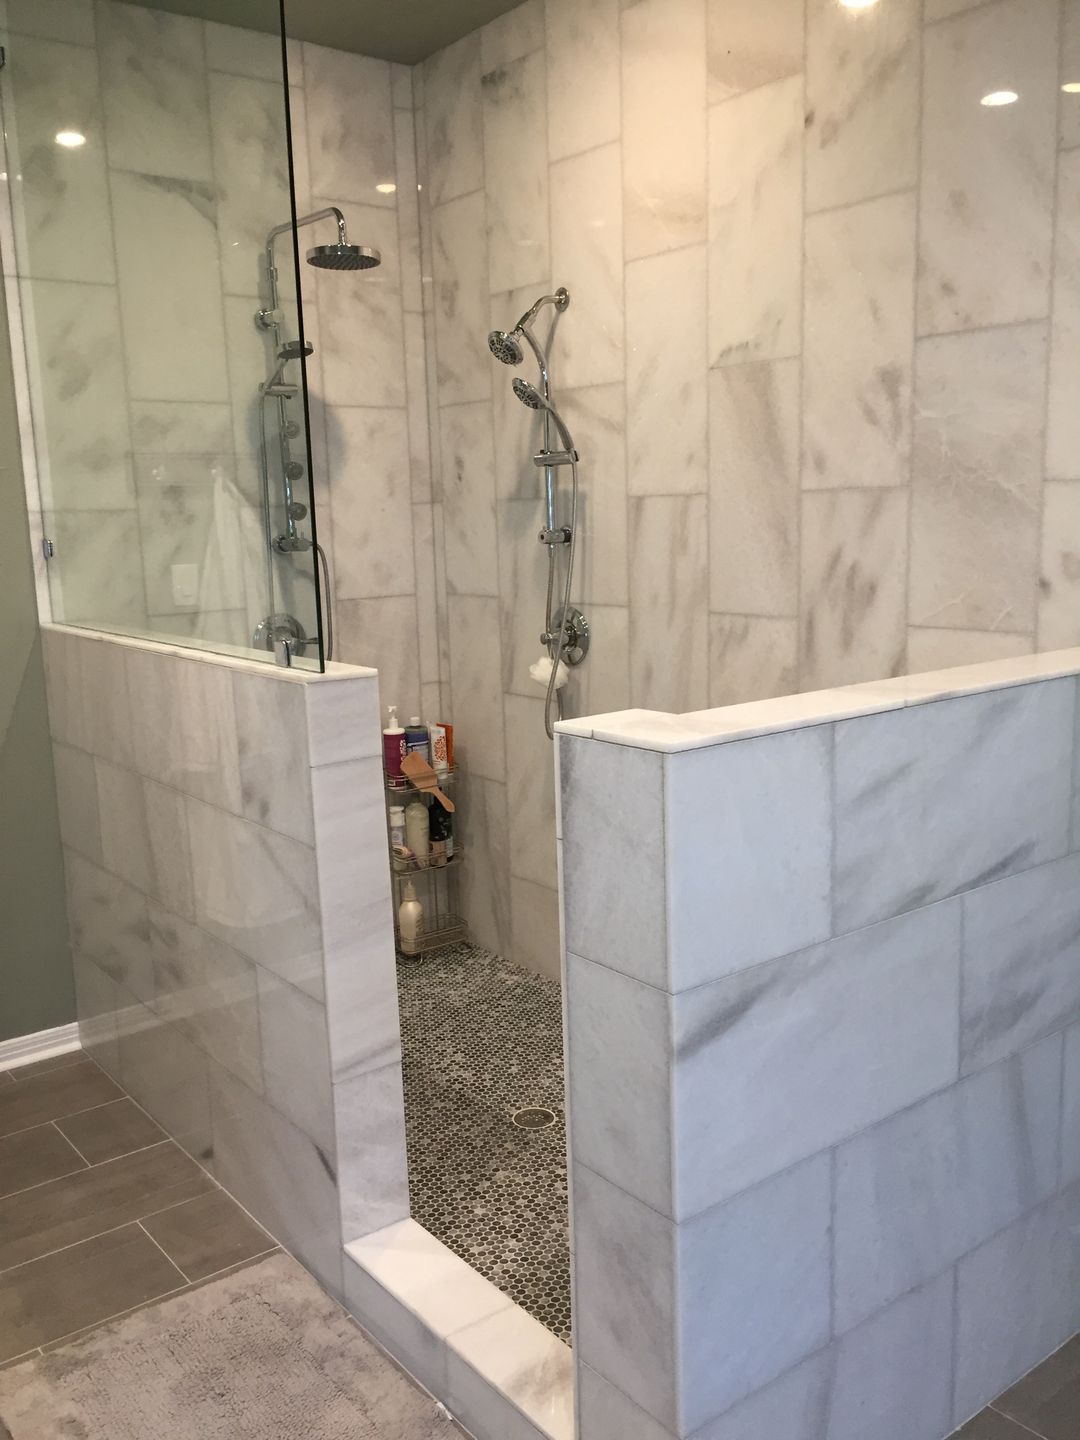 A bathroom with marble tiles and a walk in shower with a glass door.